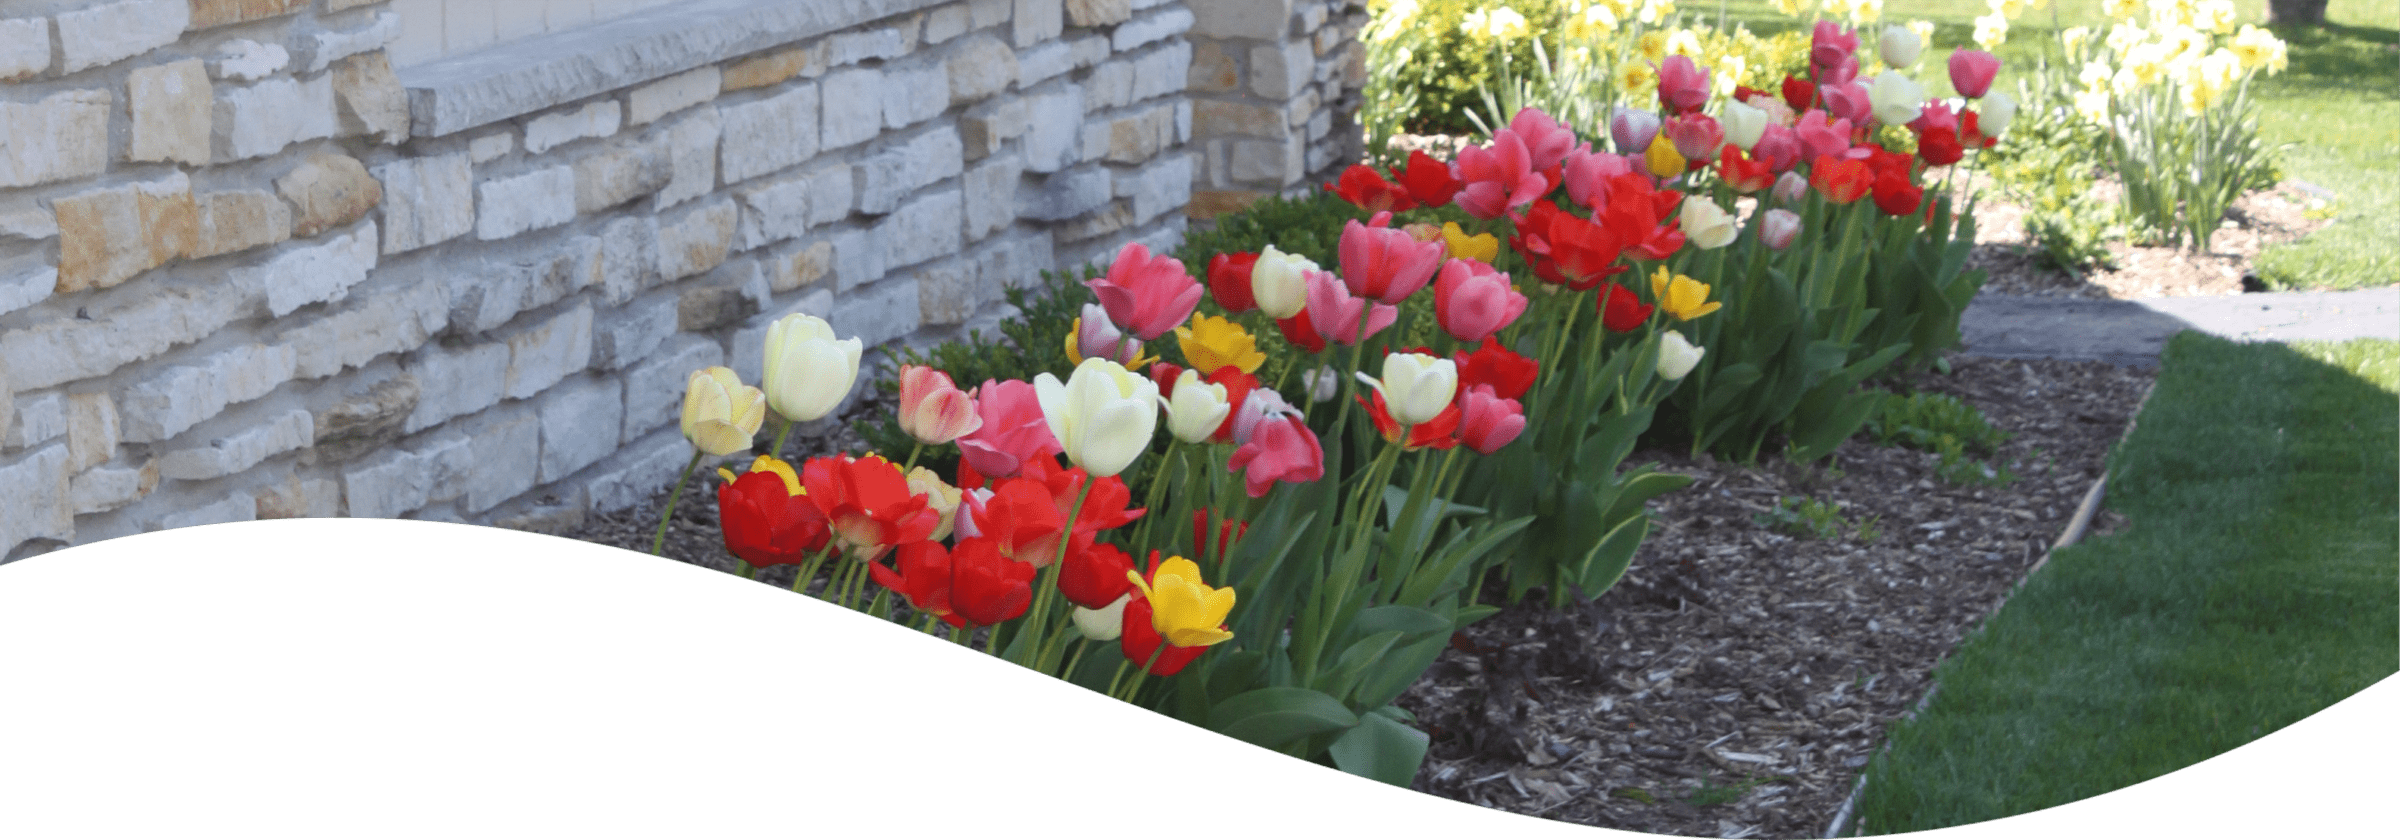 A vibrant garden bed with a mix of red, pink, yellow, and white tulips against a stone wall, under a sunny sky, beside a grassy lawn.